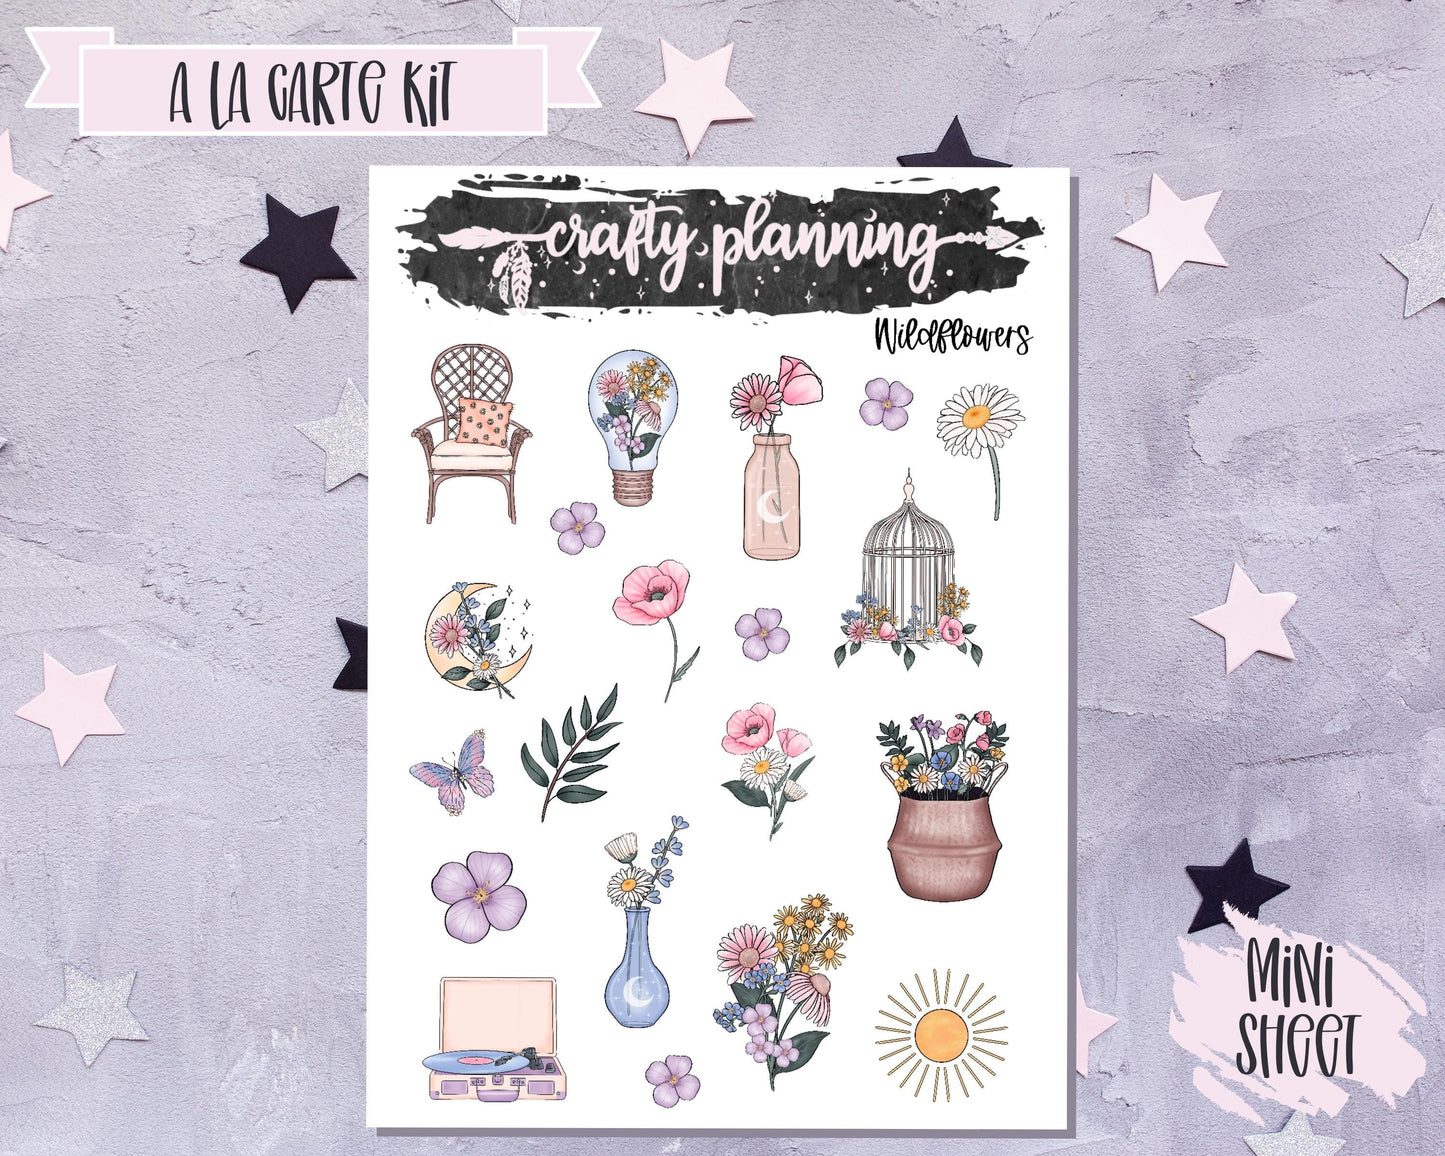 Floral Stickers, Vertical Planner, Weekly Planner Kit, Planner Stickers, Spring Stickers, Summer Stickers, Witchcraft Stickers, Journal Kit